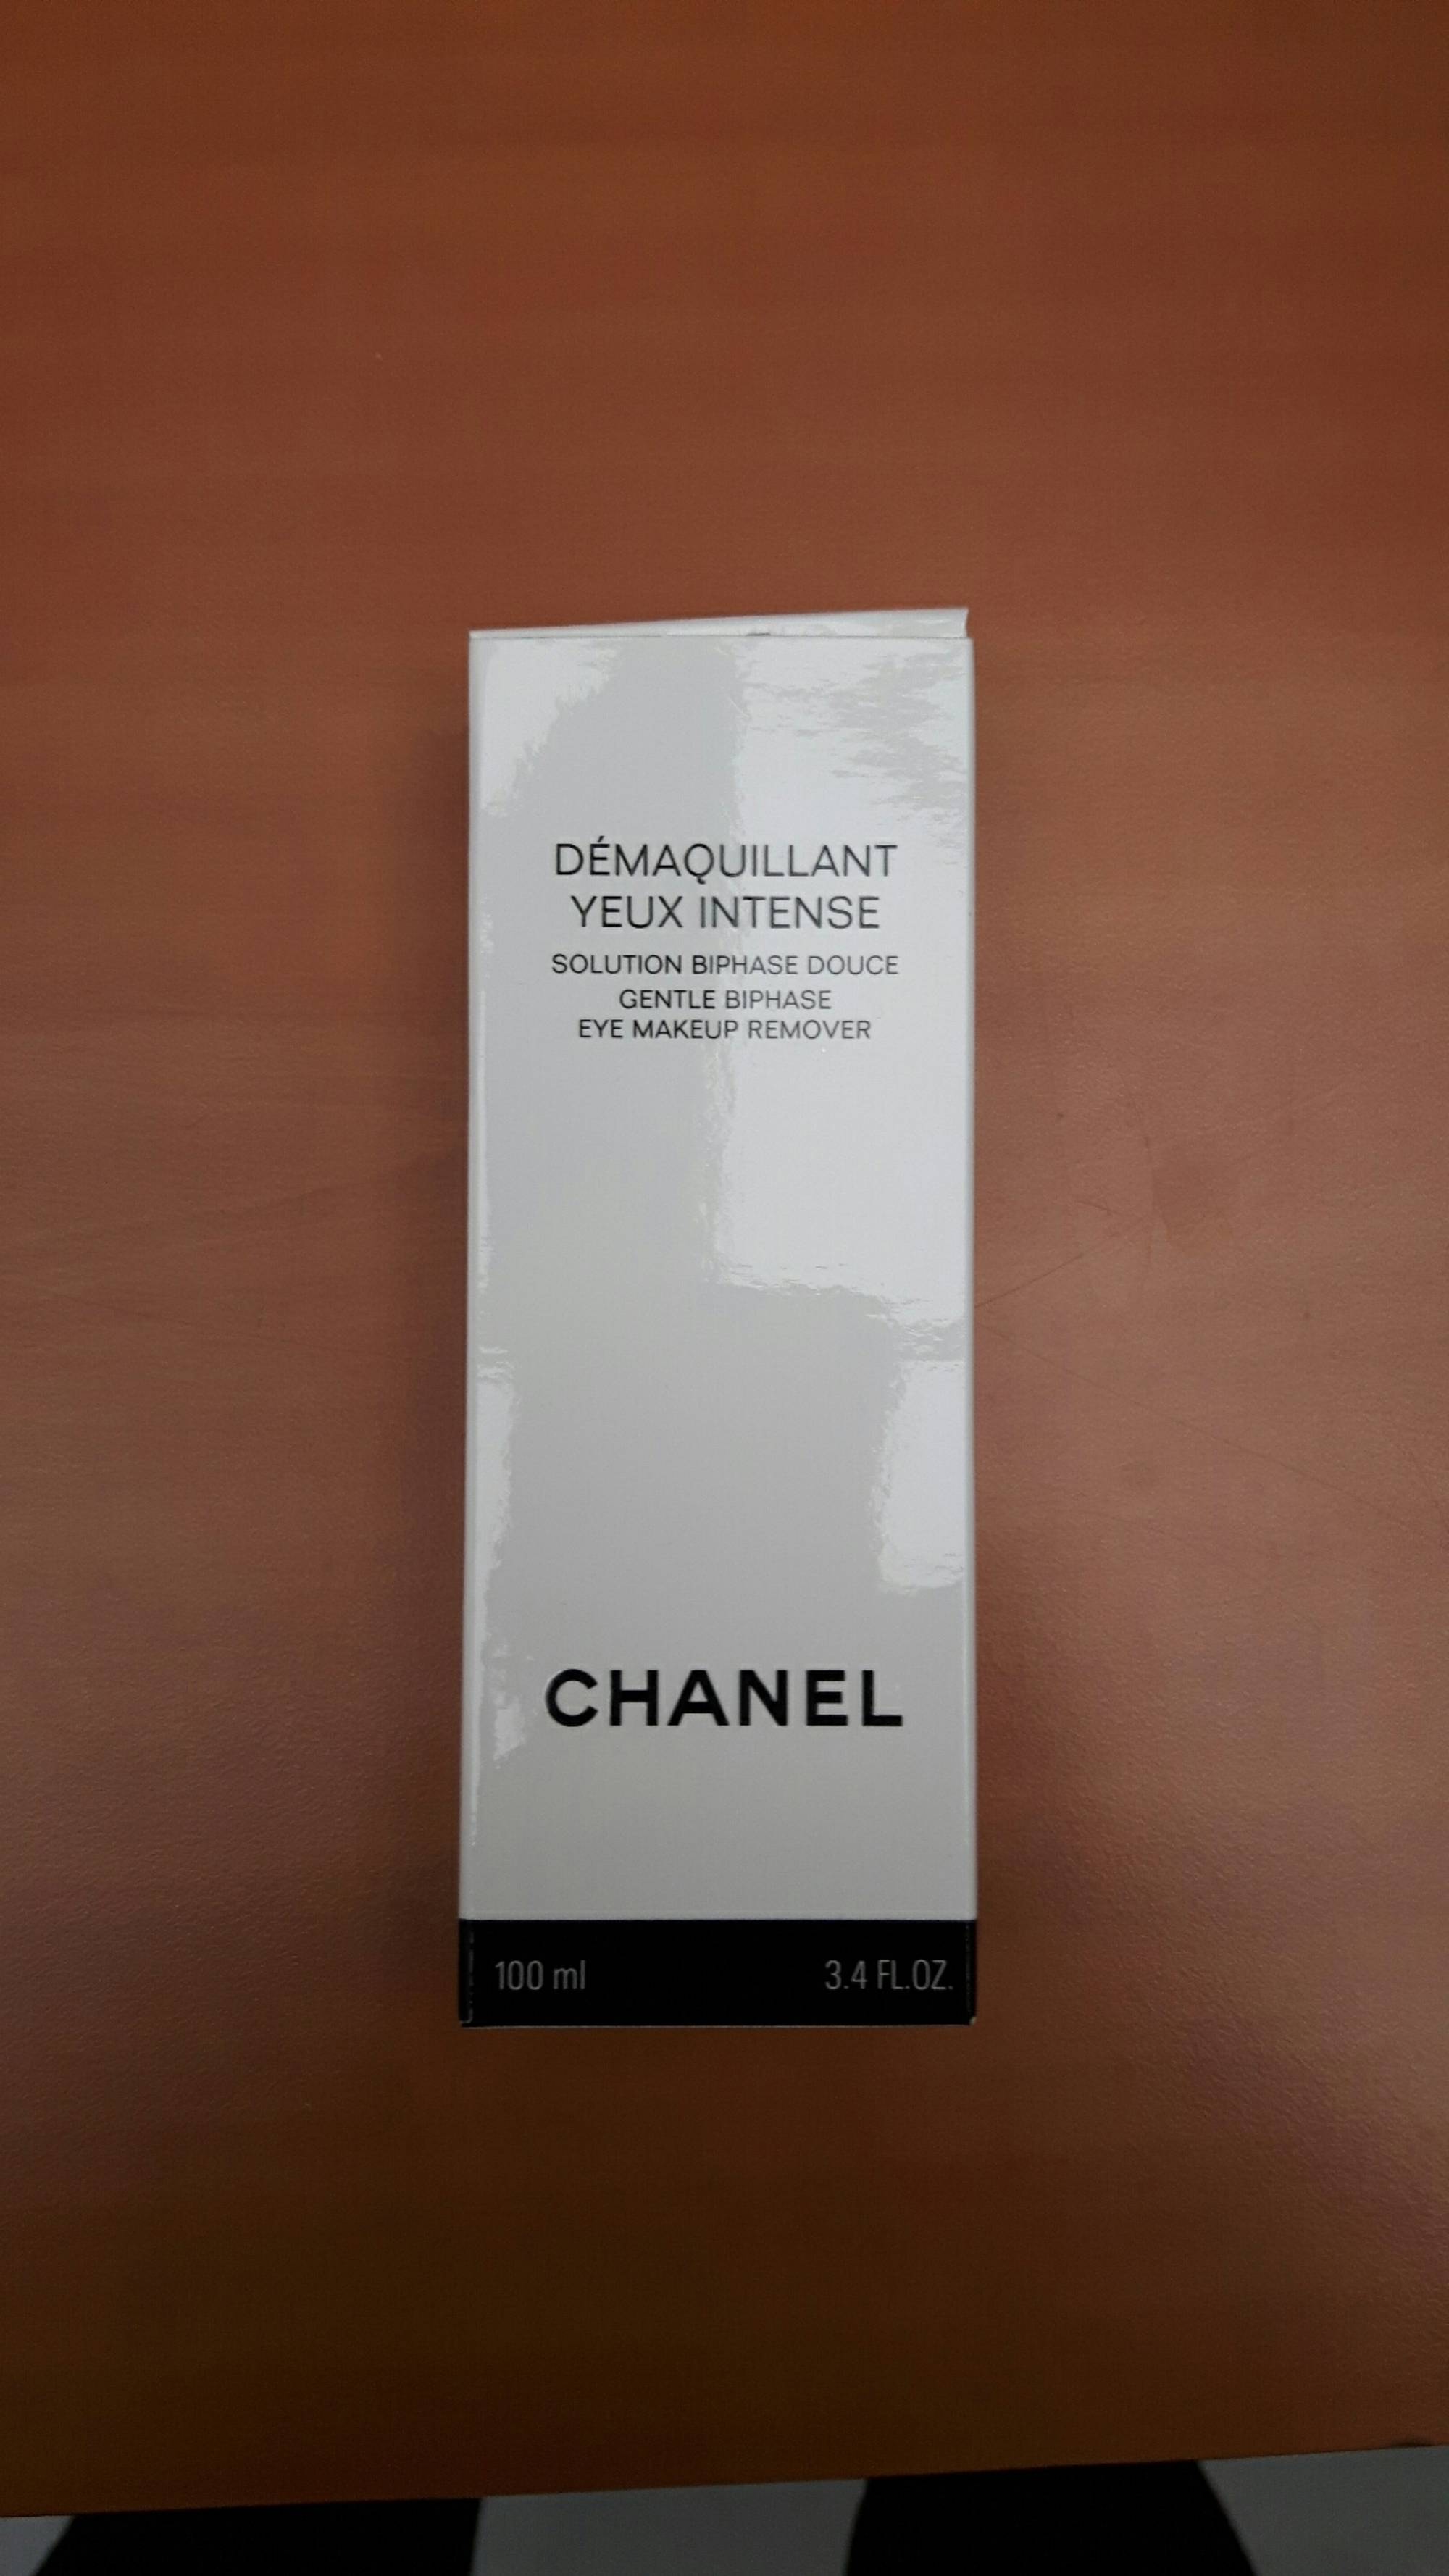 CHANEL - Démaquillant yeux intense